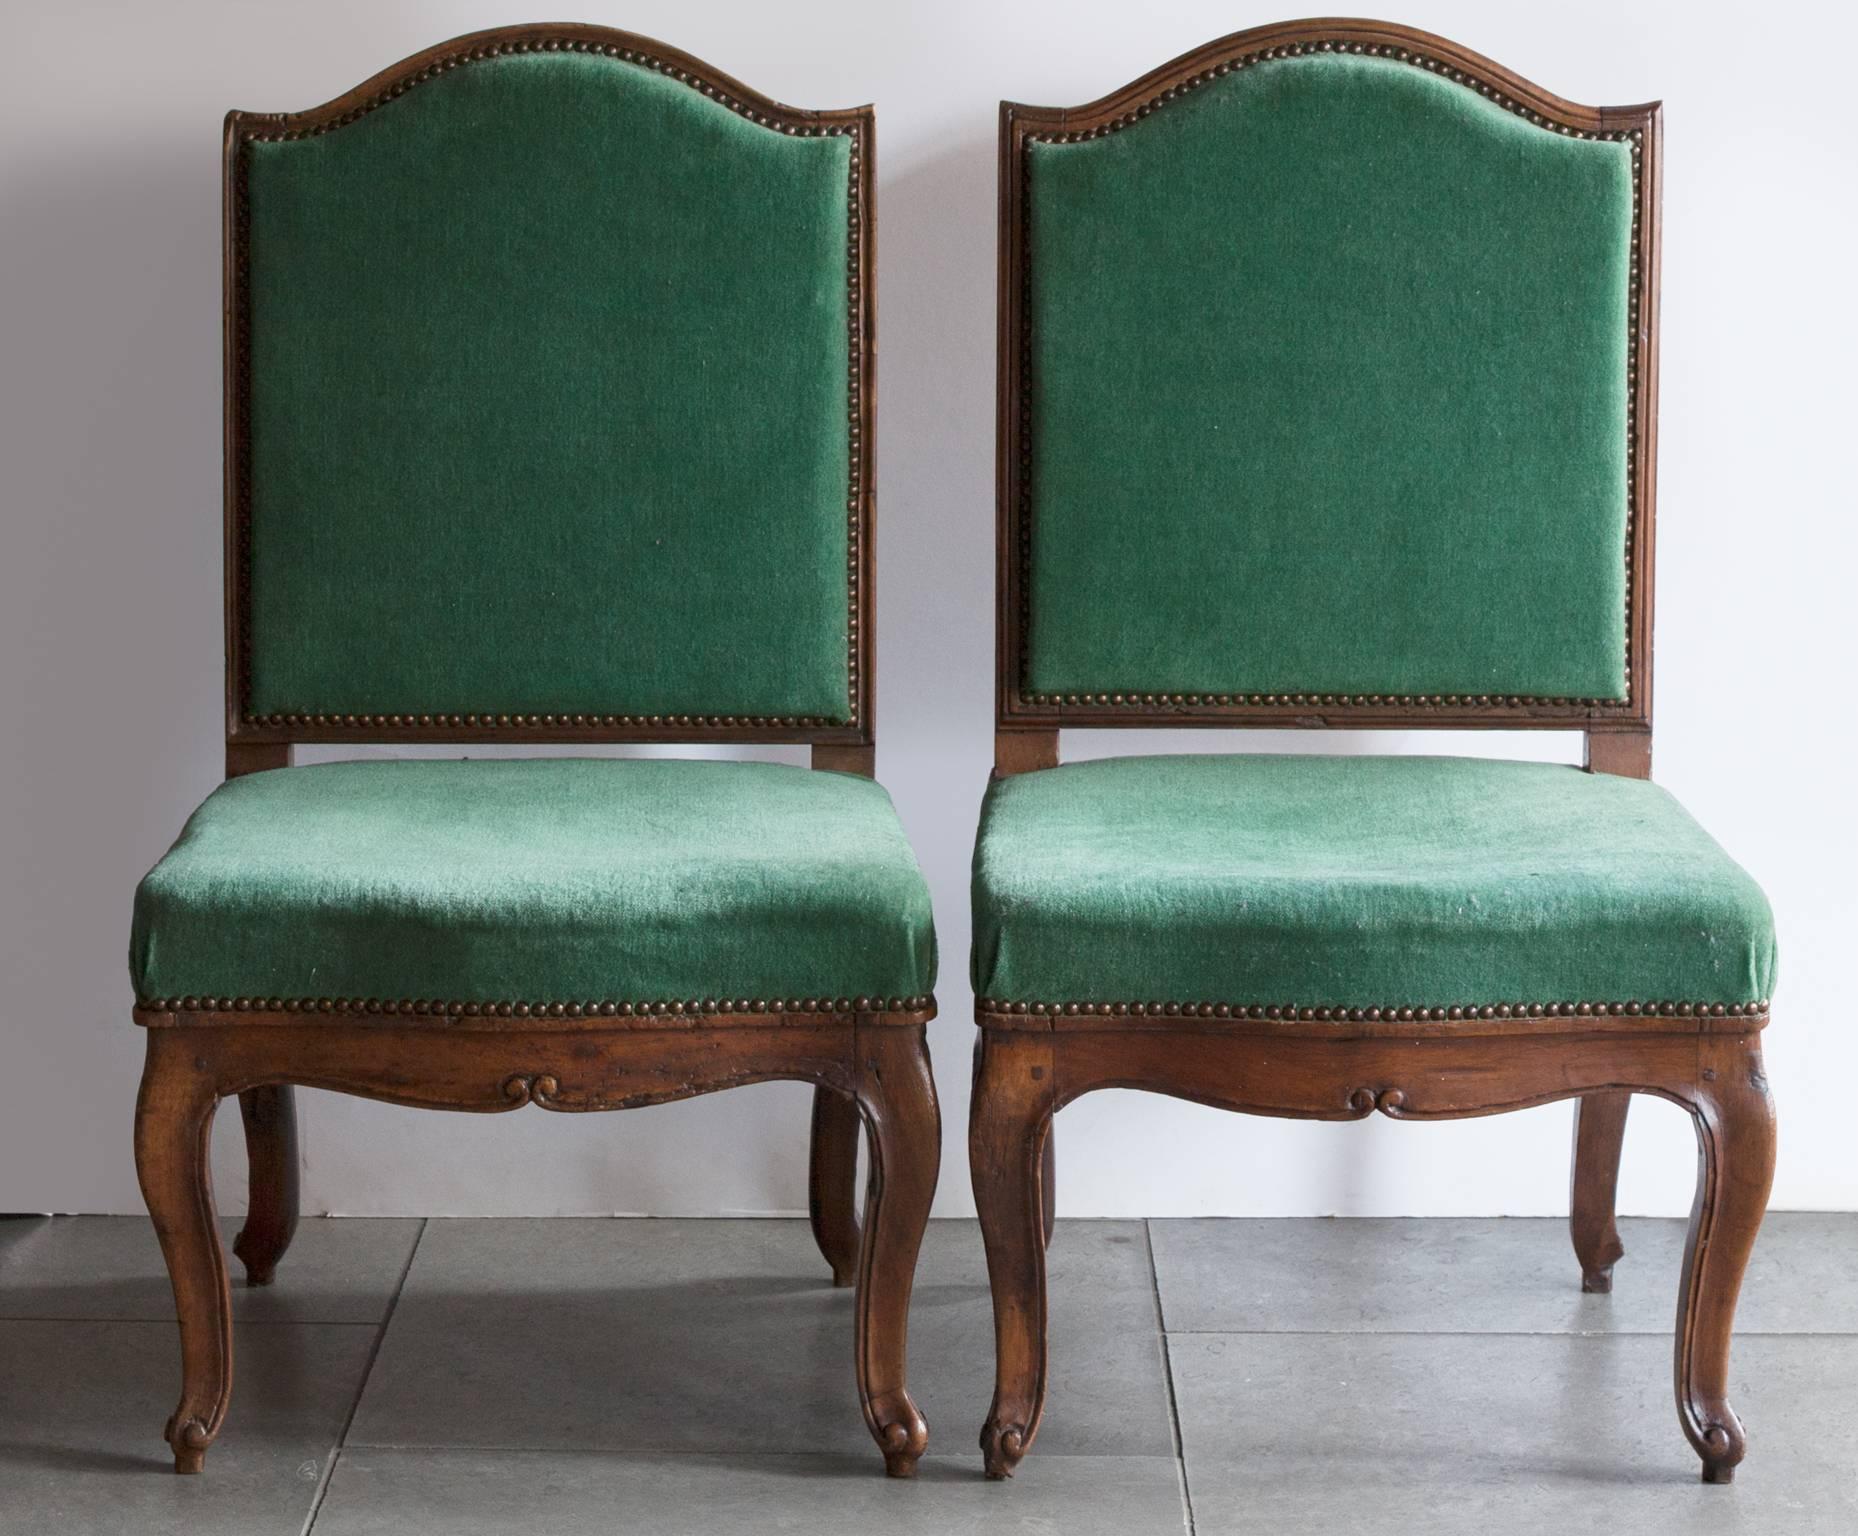 A pair of mid-18th century Provincial side chairs in carved walnut.
Cabriole legs terminating in scrolls. Upholstered in later green velvet. Some small marks to one of the seats,
France, circa 1750.